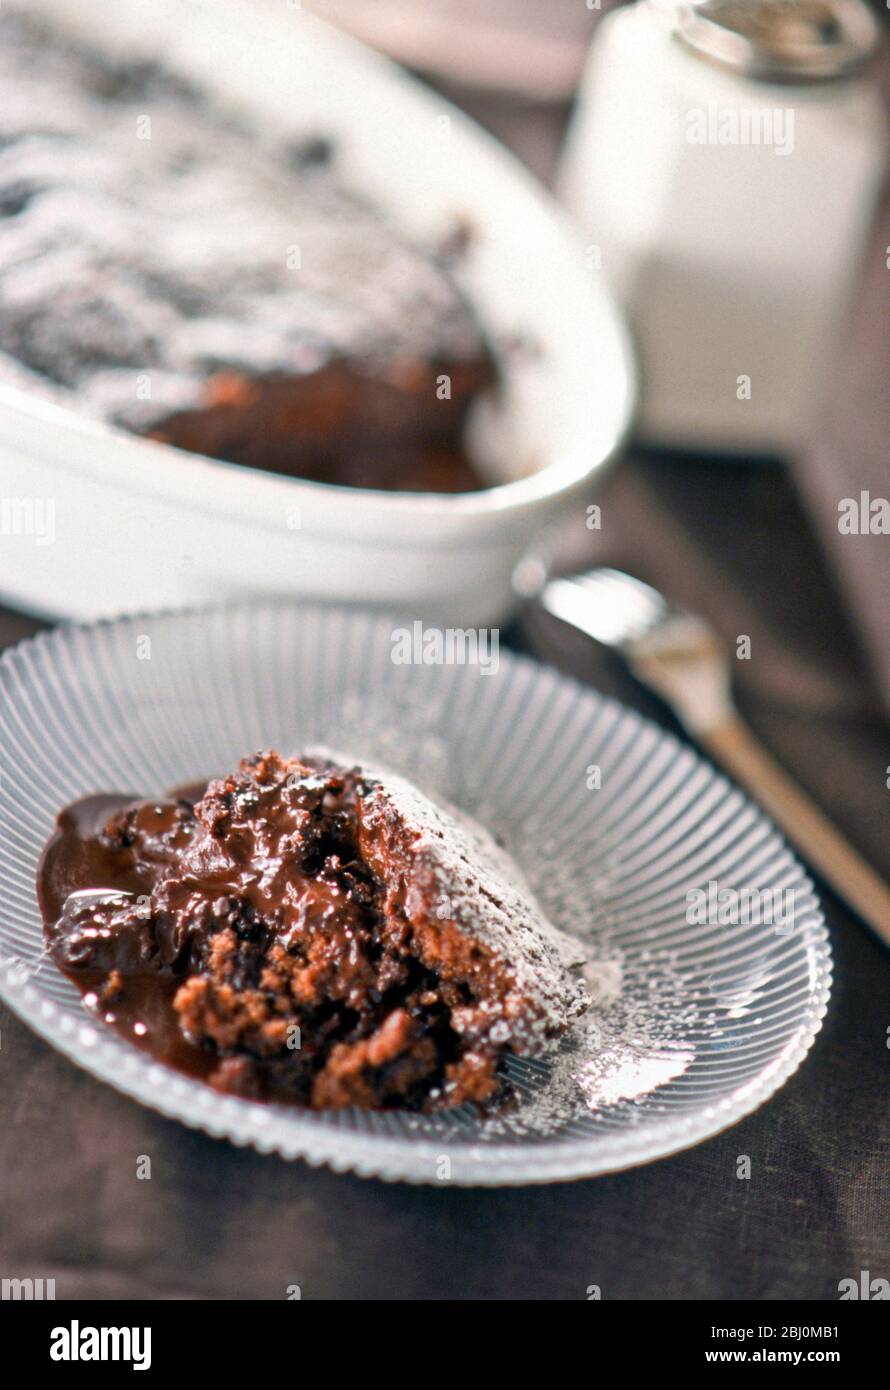 Portion of hot chocolate pudding on glass plate with whole pudding in the background - Stock Photo